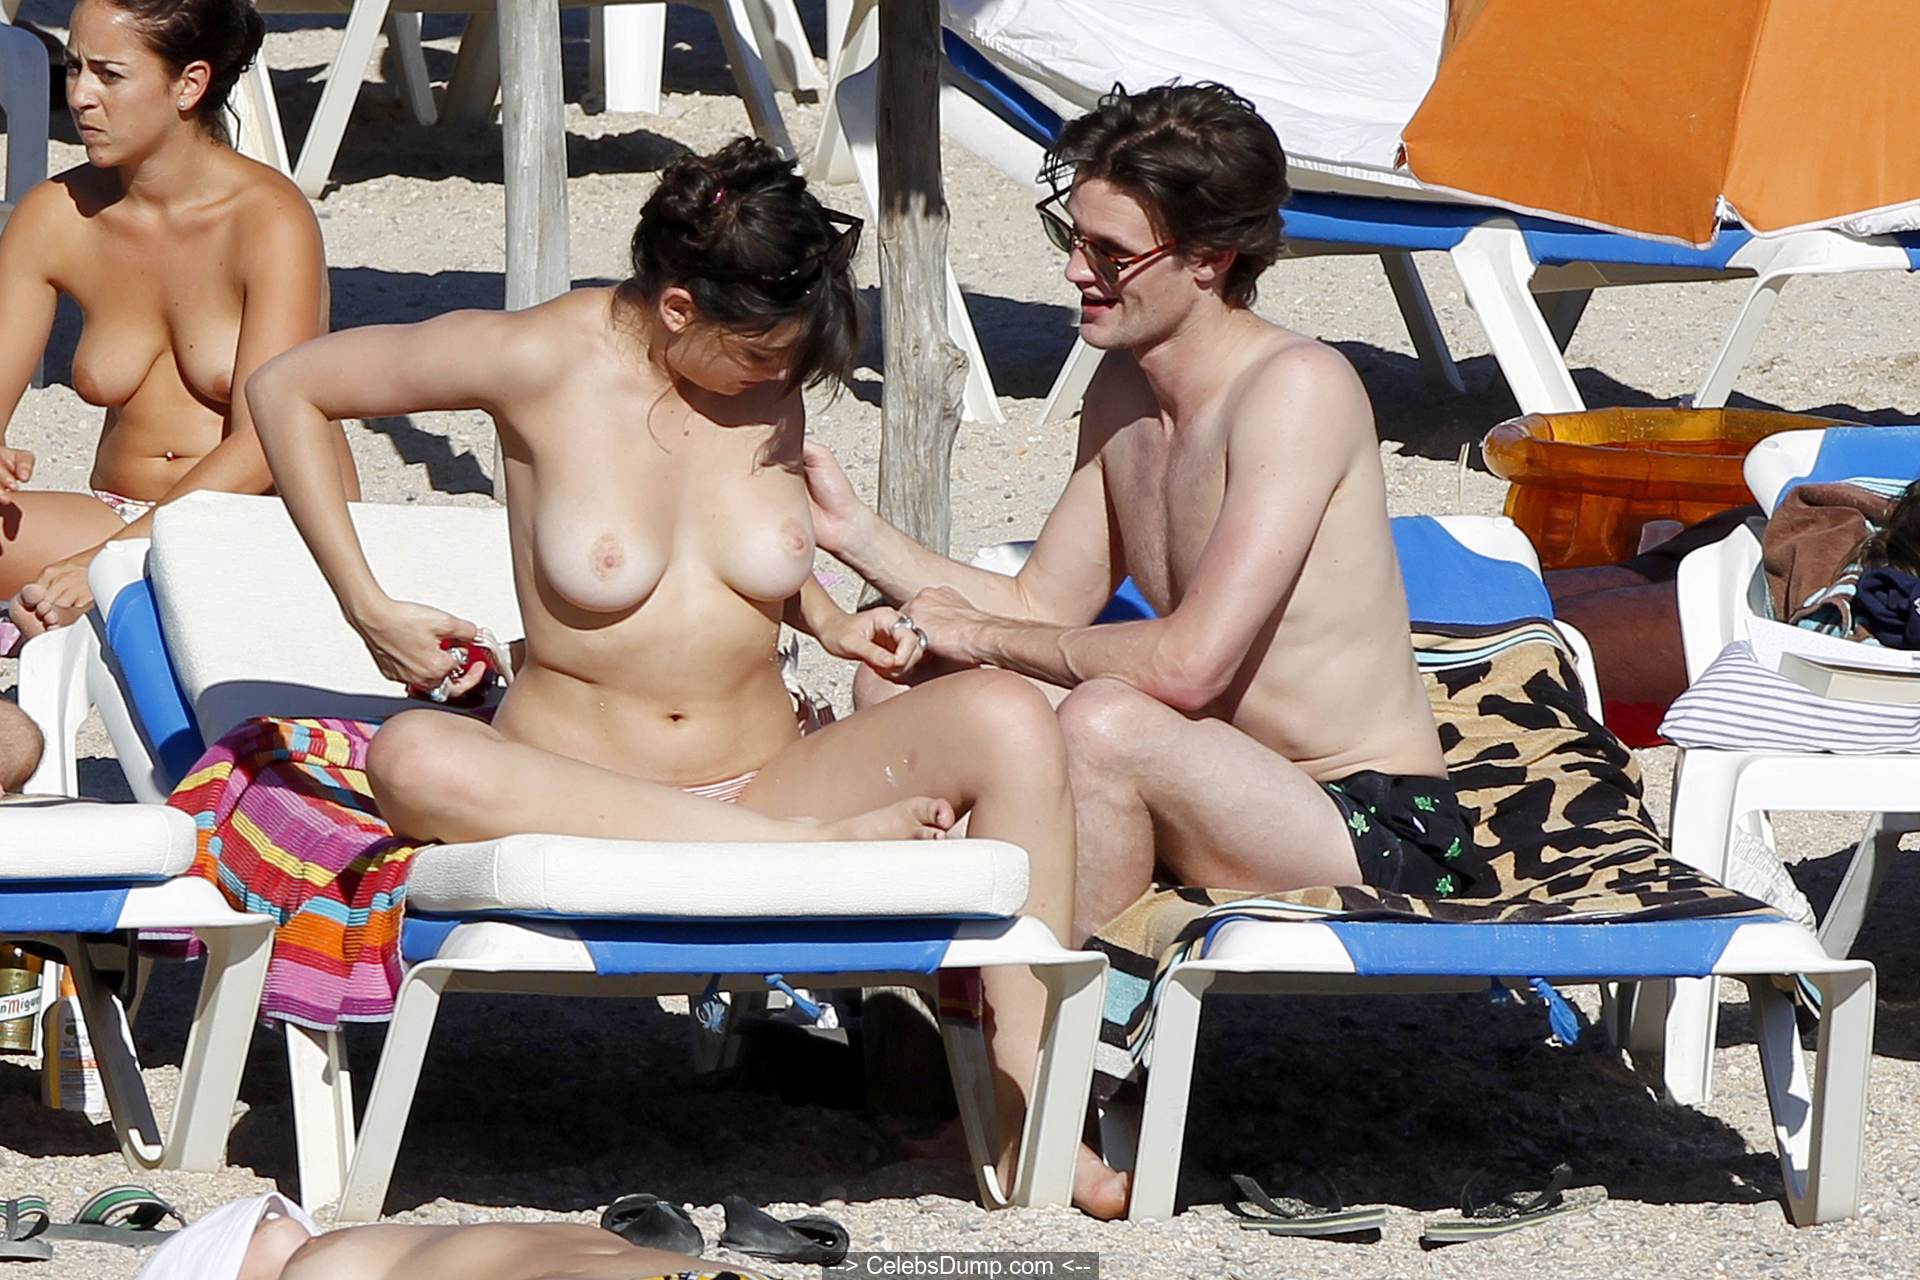 Daisy Lowe changing on the beach shows her nude boos.